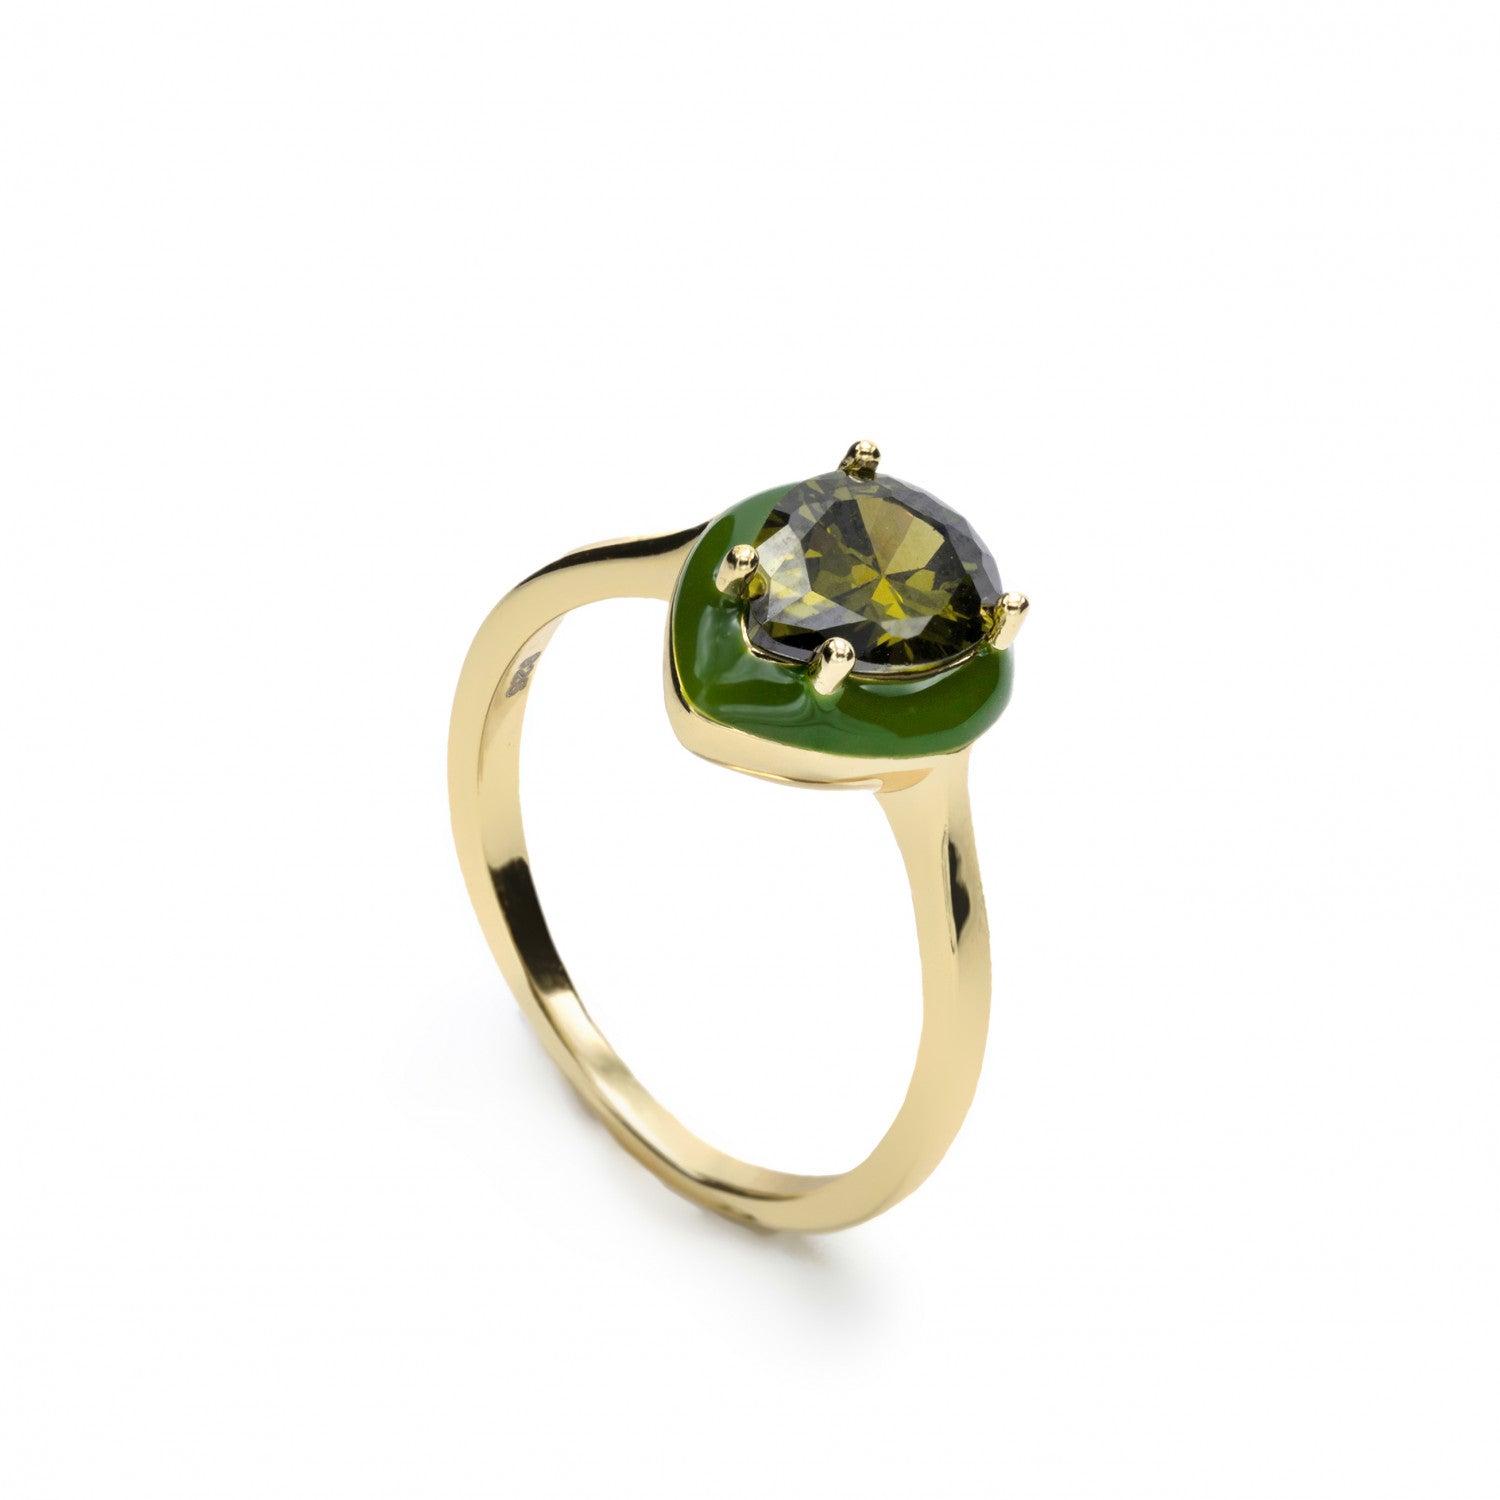 Ring - Stone rings with green enamel drop design stones